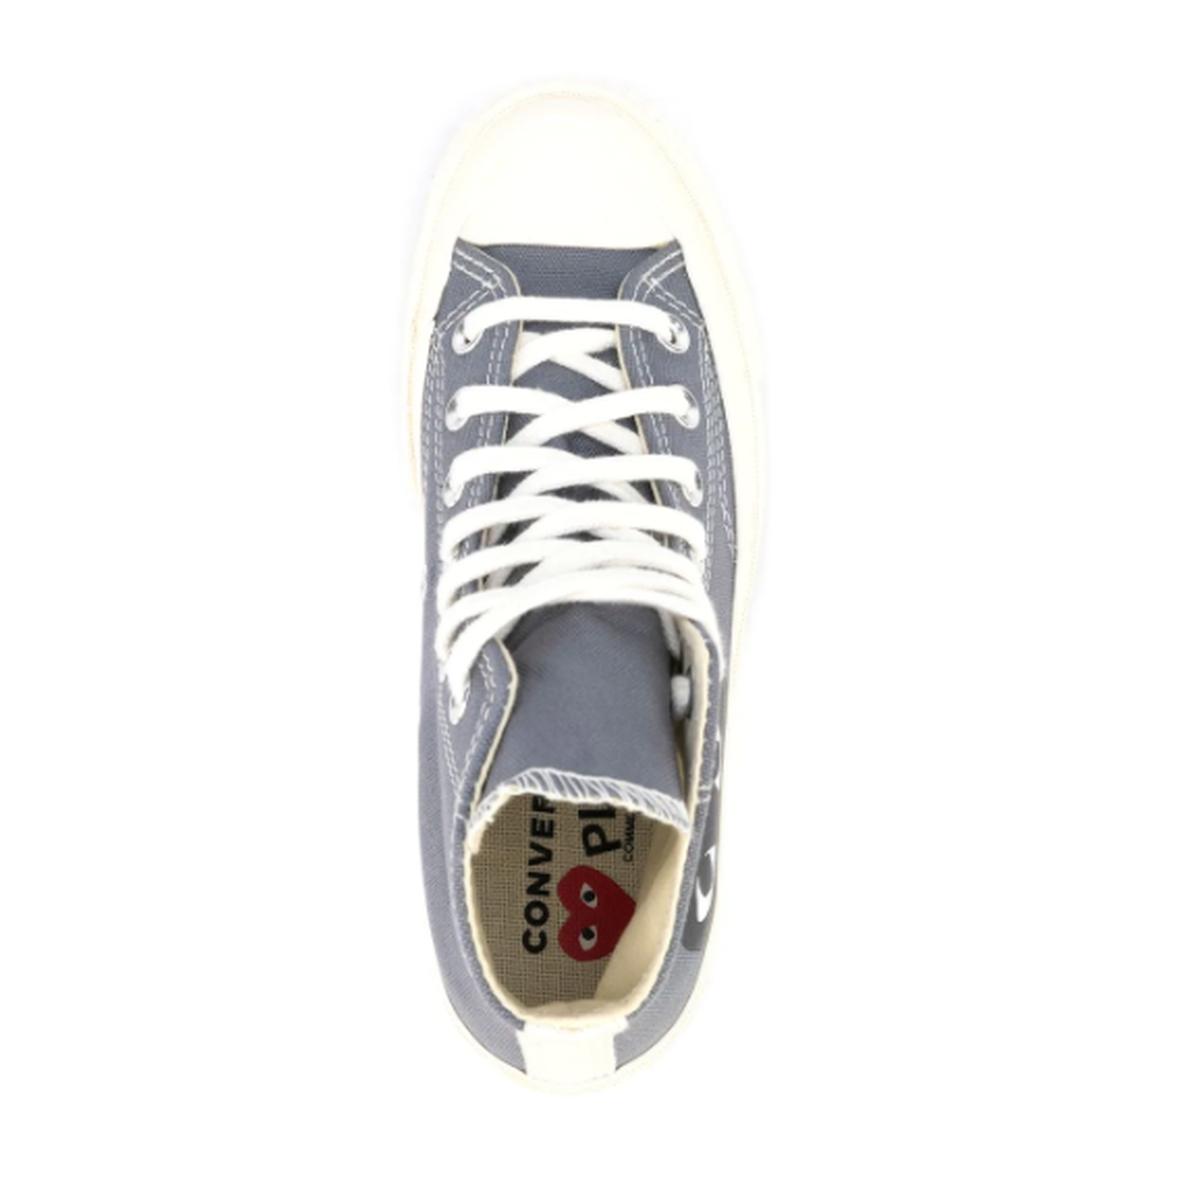 Comme Des Garcons Play Grey High-Top Sneakers